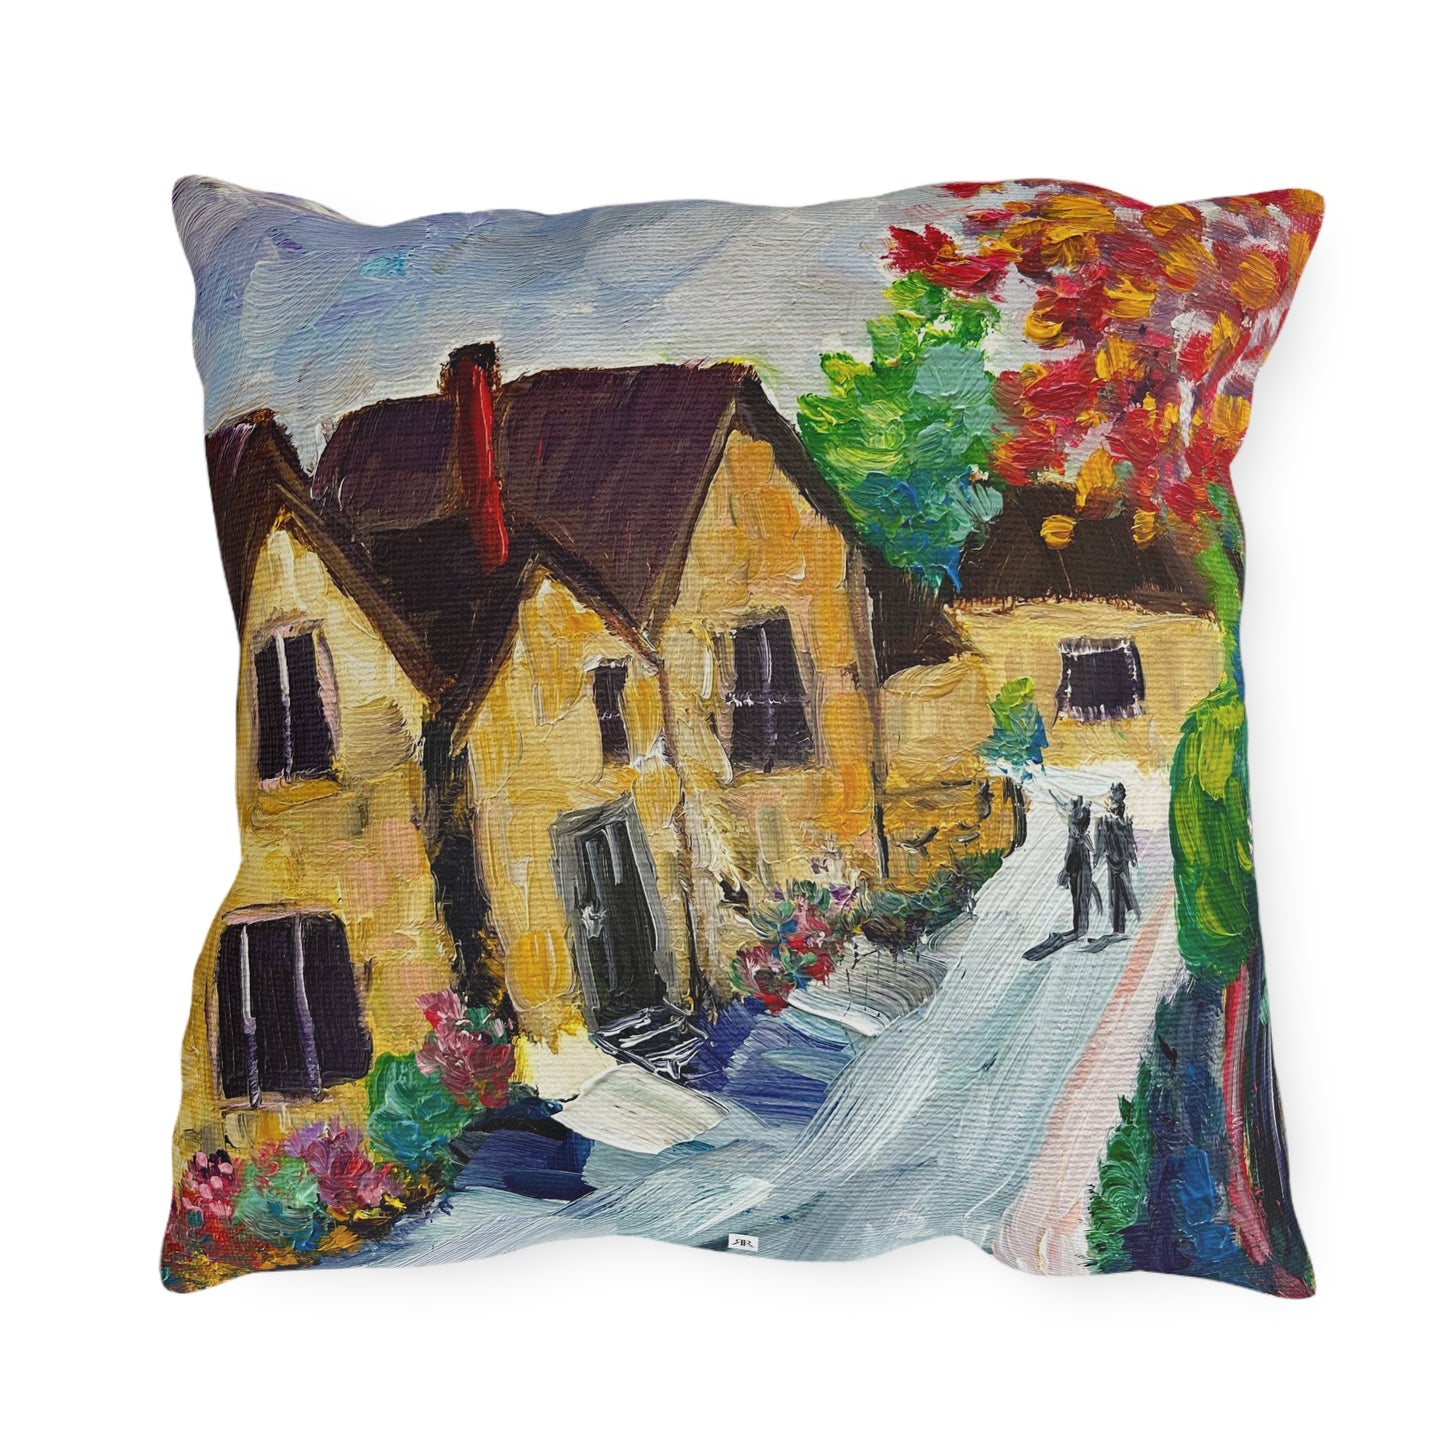 Medieval Village Cotswolds Outdoor Pillows